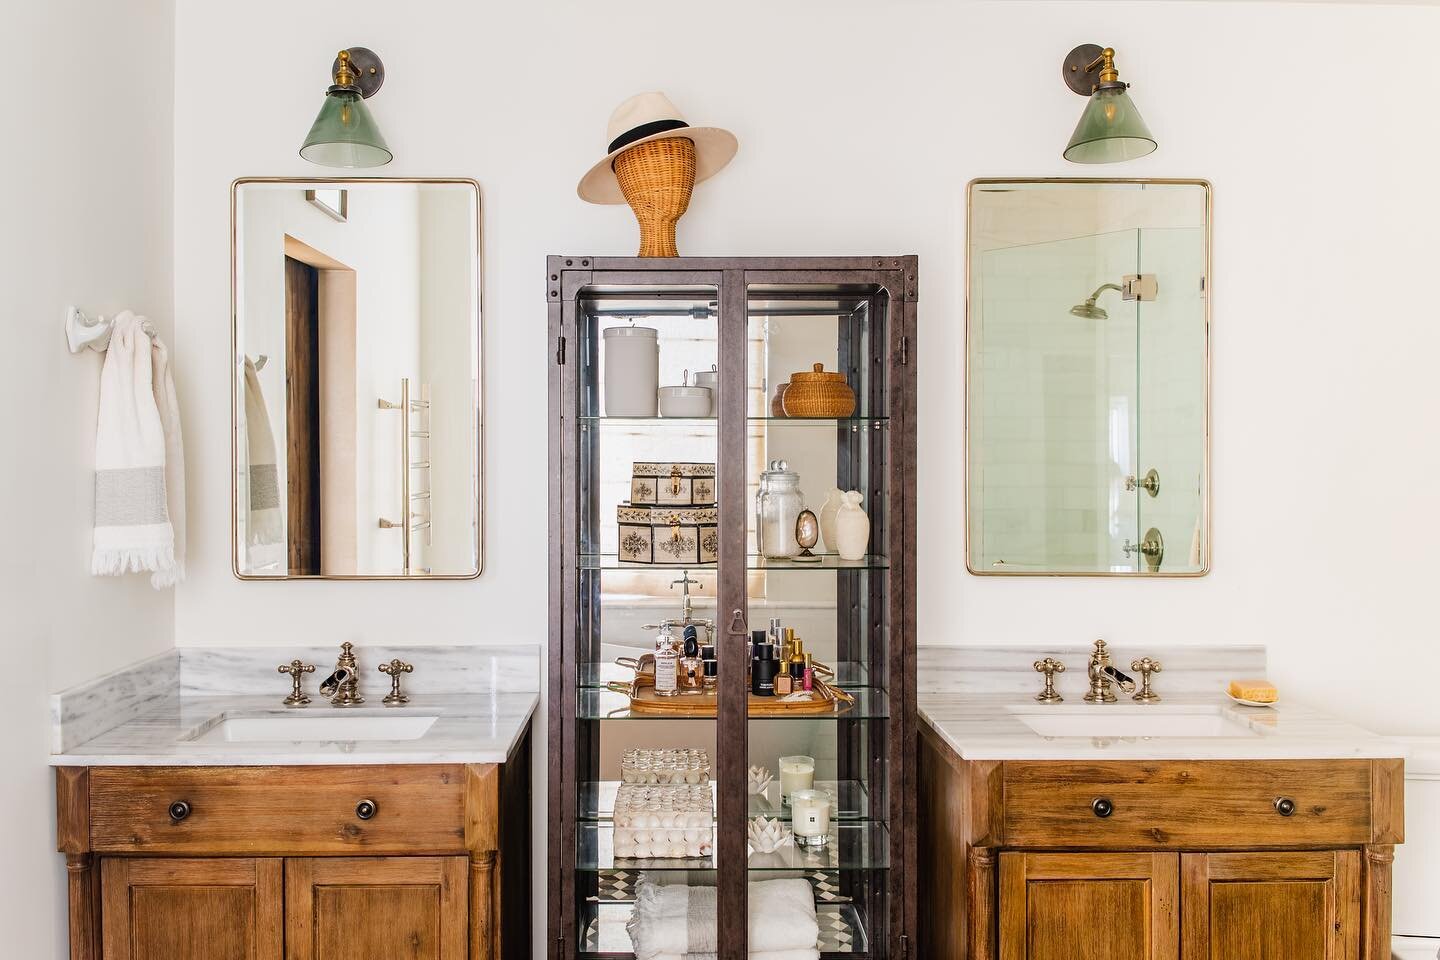 No #bathroom storage? No proble.... ha! Gotcha! BIG PROBLEM. What is a bathroom w/out storage?! Q-tips, retainers and fungus cream... oh my! 😅 Especially if you&rsquo;re a high maintenance gal like we happen to be. It doesn&rsquo;t have to be basic,